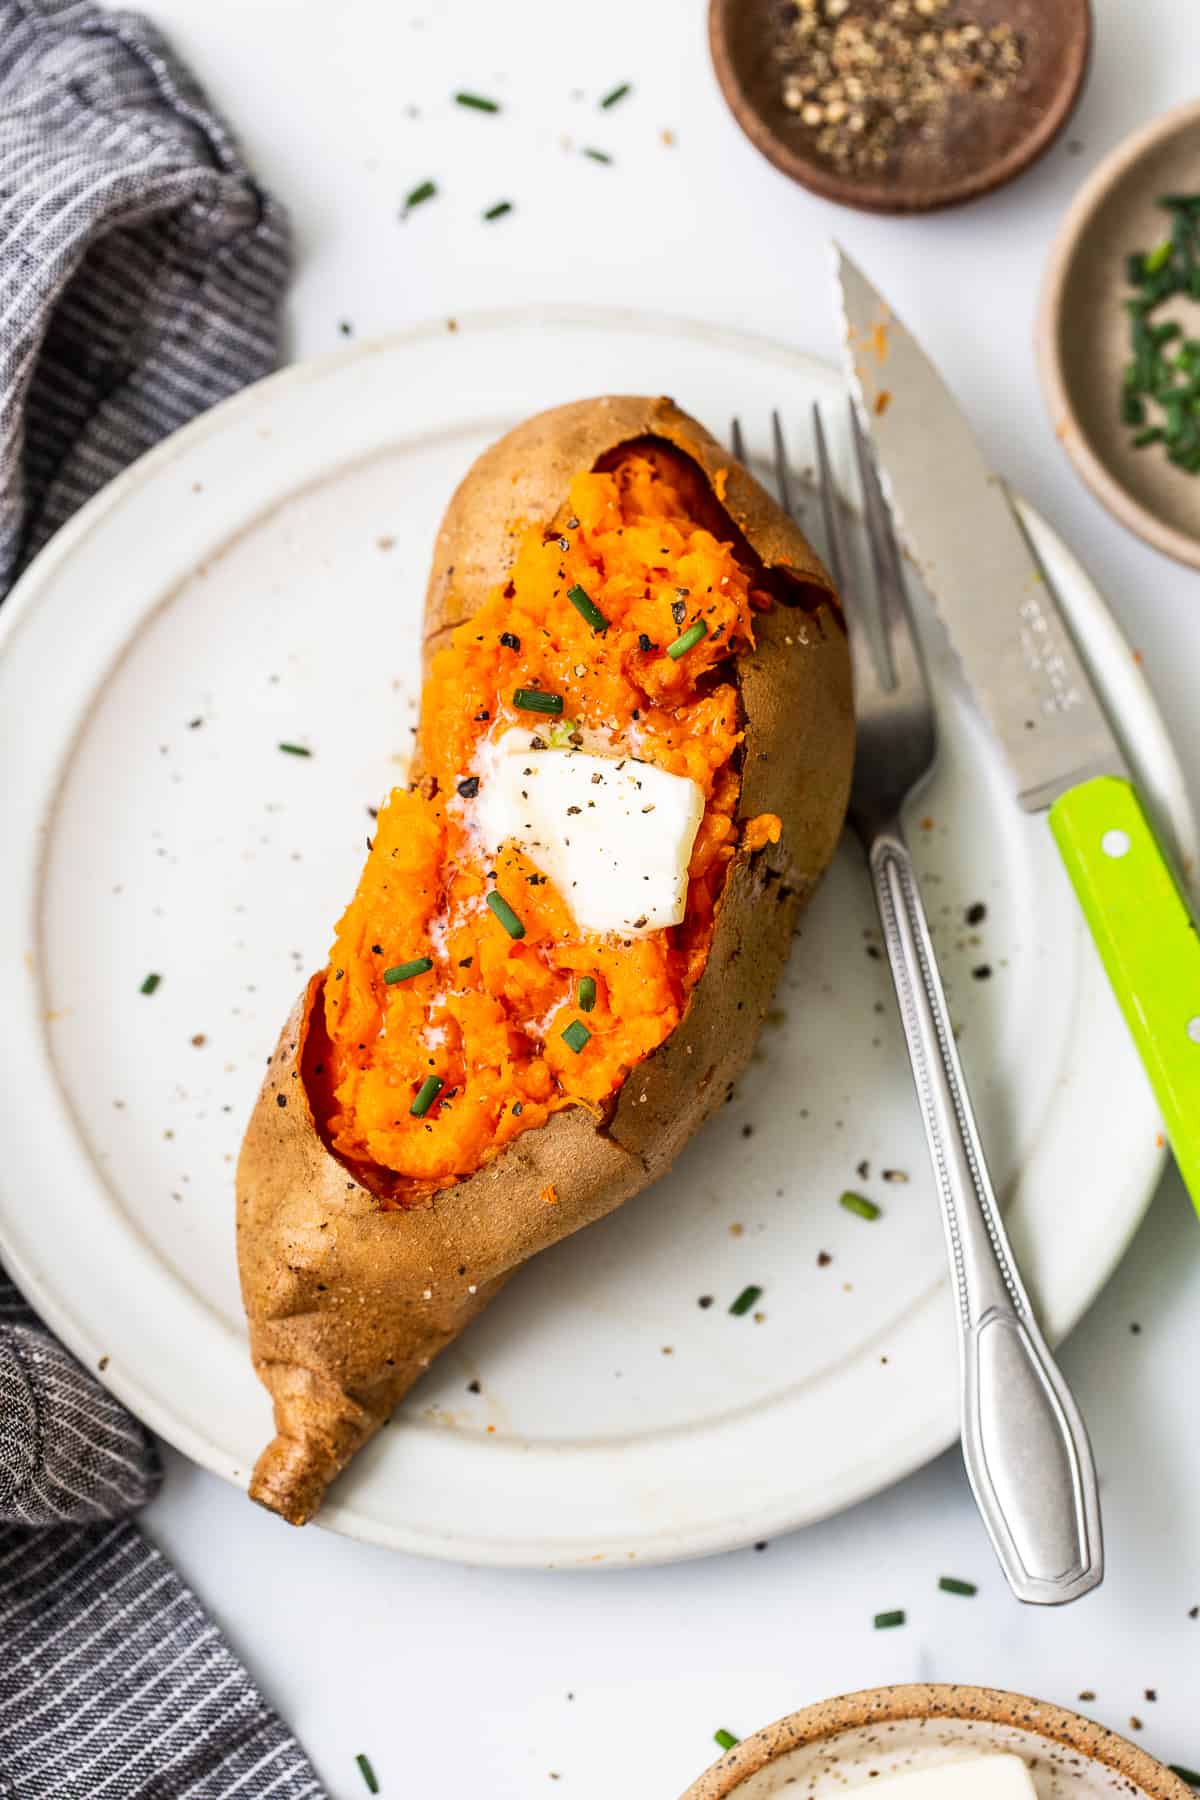 Baked sweet potato on a plate topped with butter.